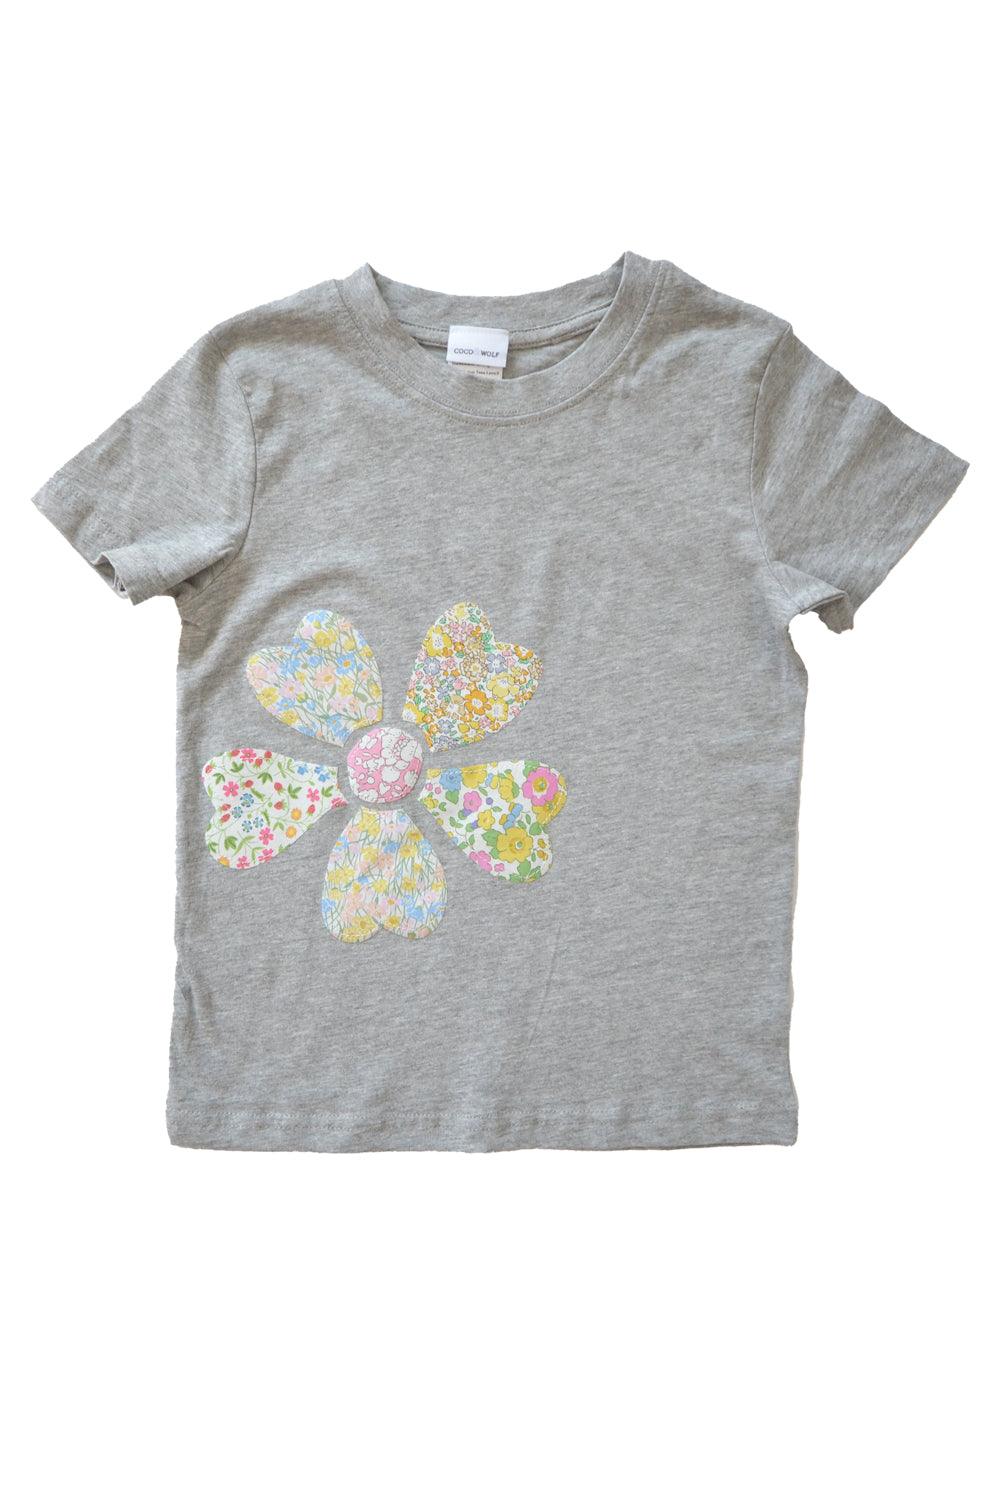 Flower Motif T-shirt made with Liberty Fabric - Coco & Wolf